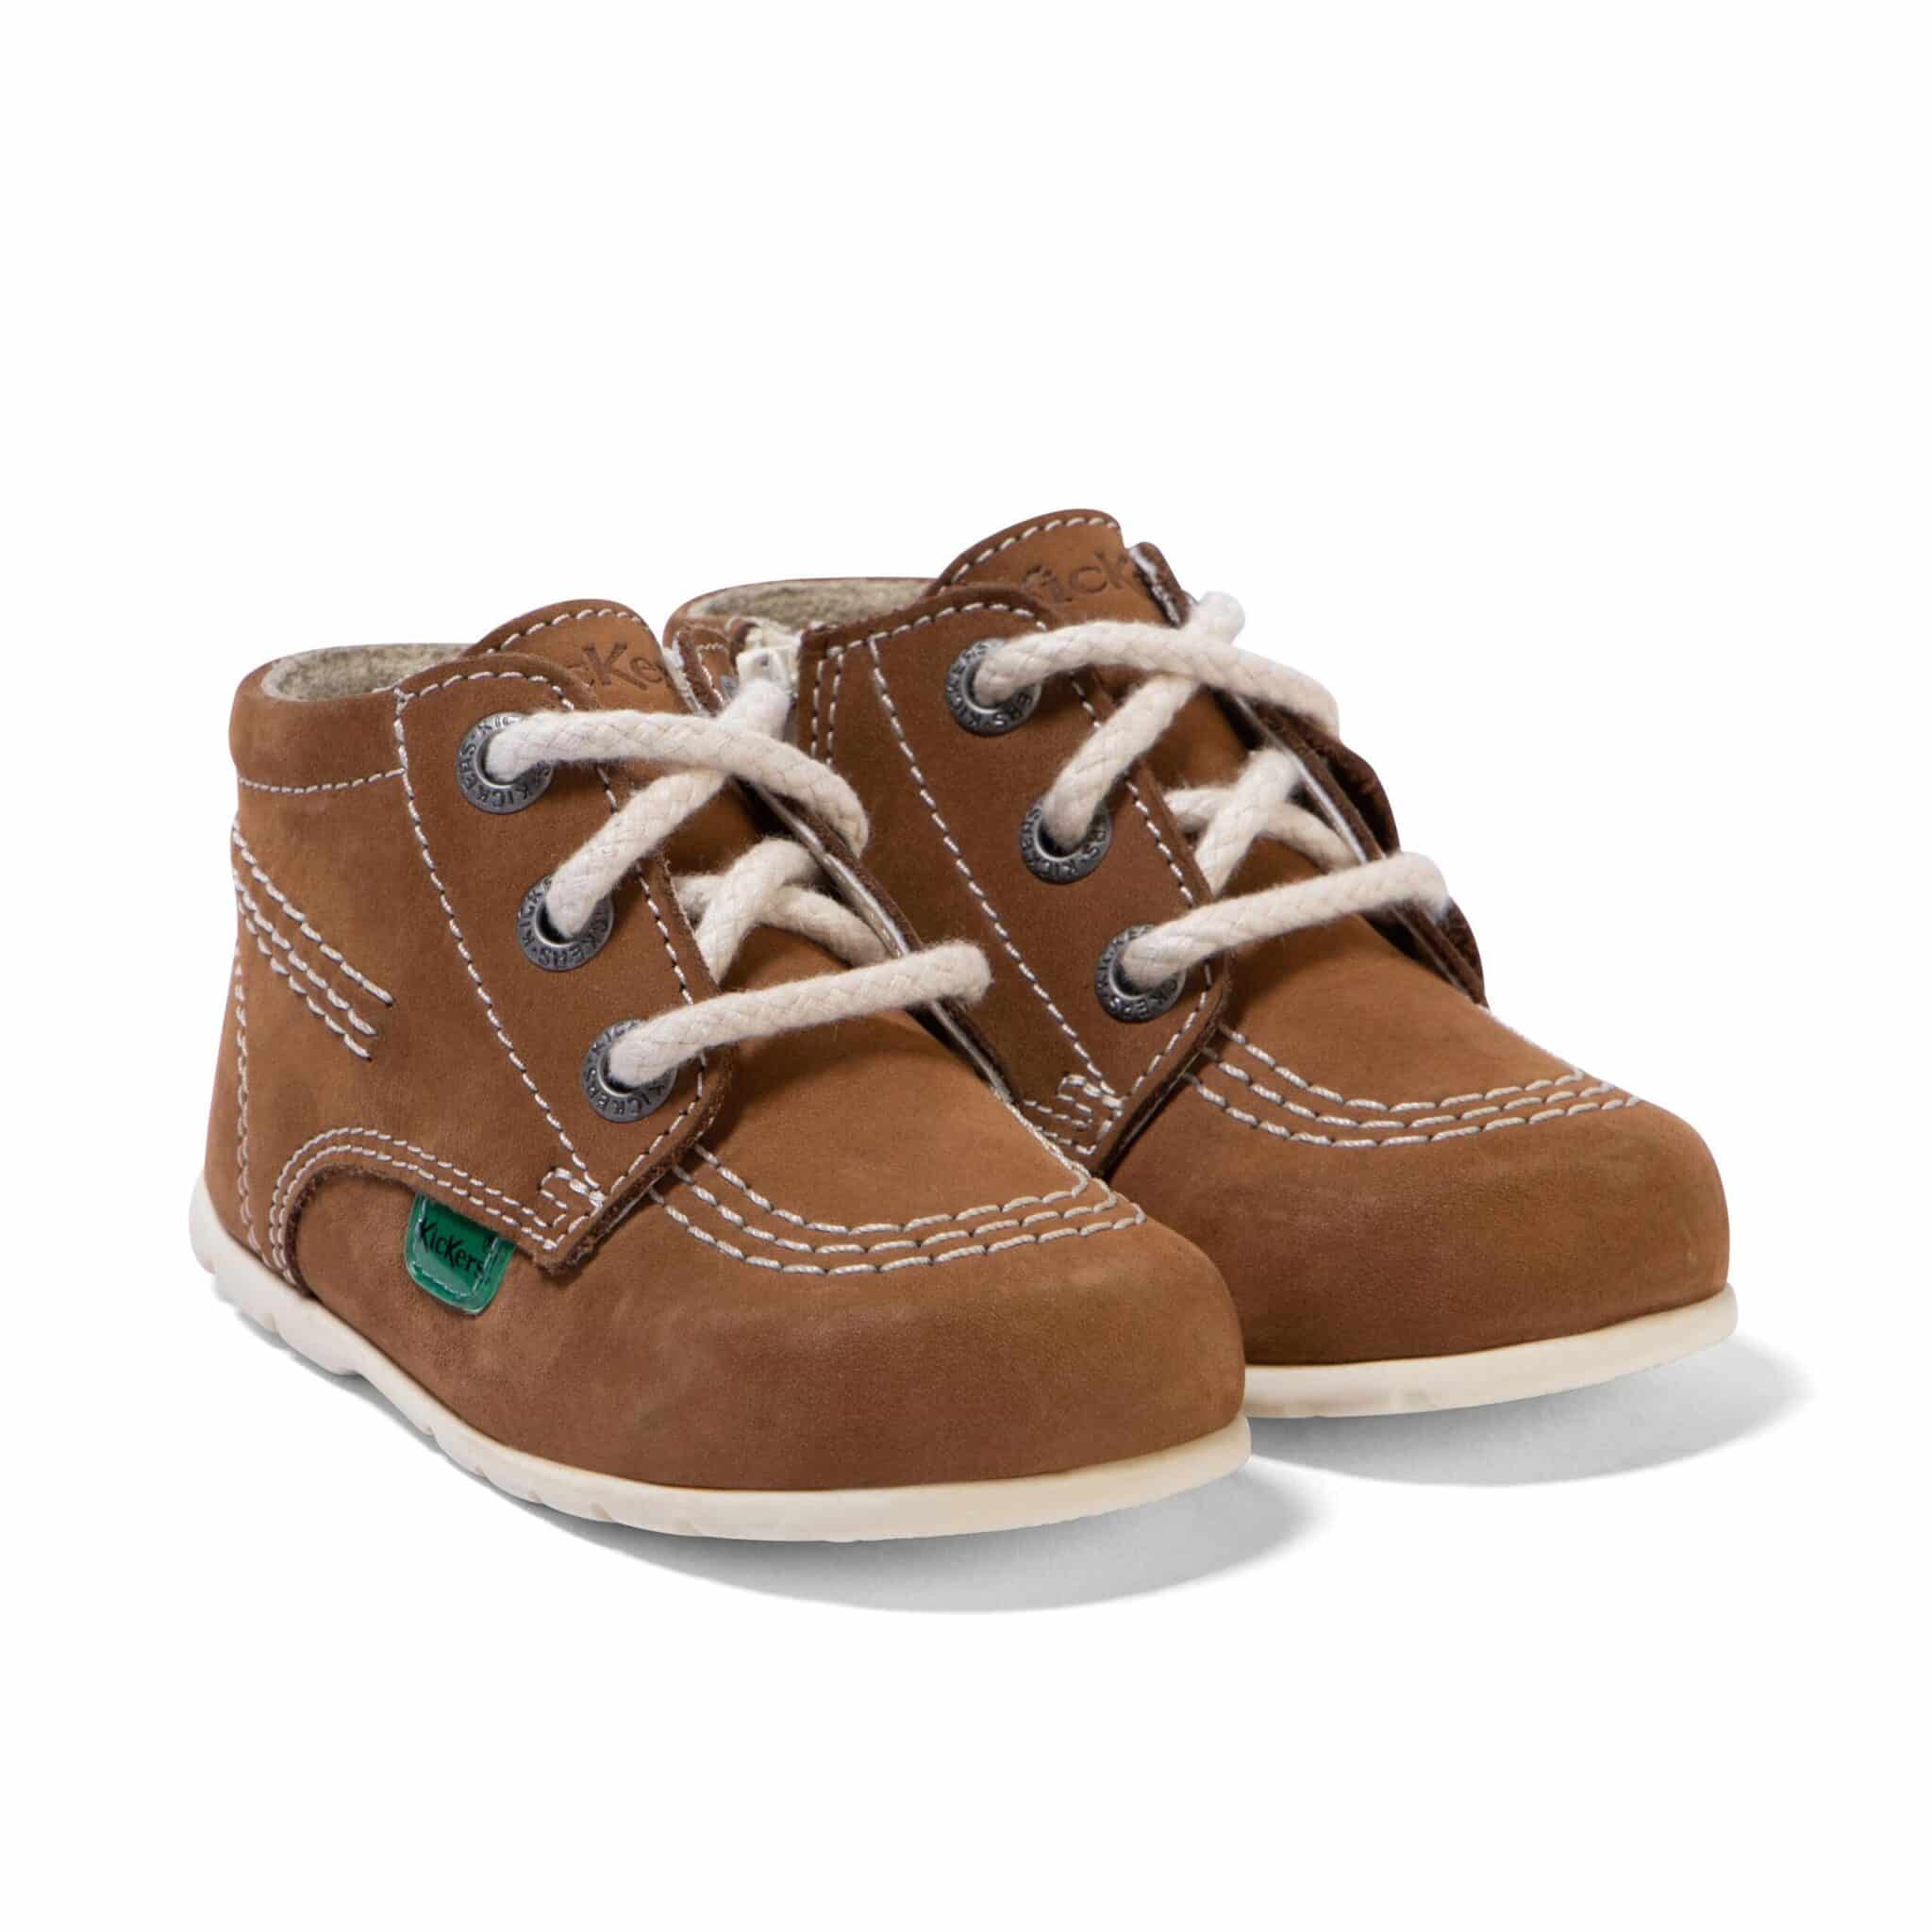 kickers boys brown shoe boots on white floor with shadow